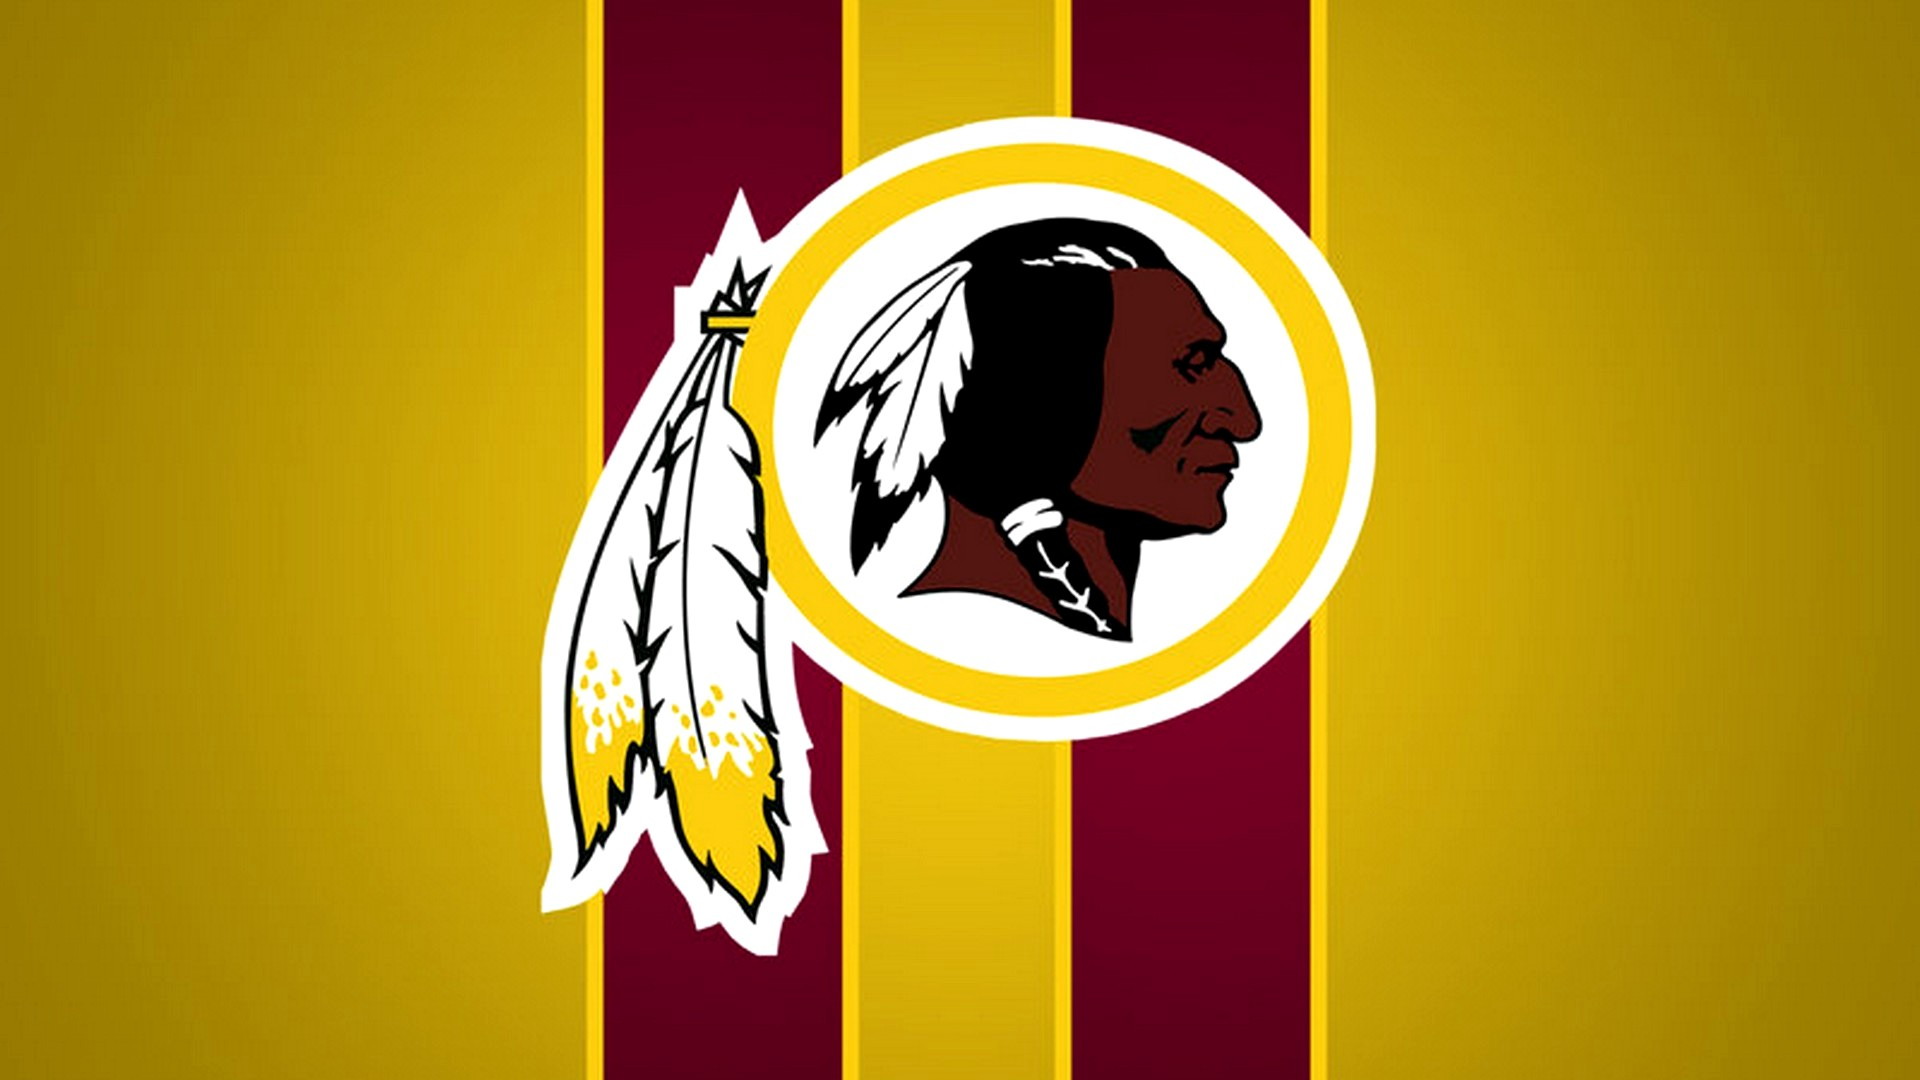 Wallpapers HD Washington Redskins with high-resolution 1920x1080 pixel. You can use and set as wallpaper for Notebook Screensavers, Mac Wallpapers, Mobile Home Screen, iPhone or Android Phones Lock Screen